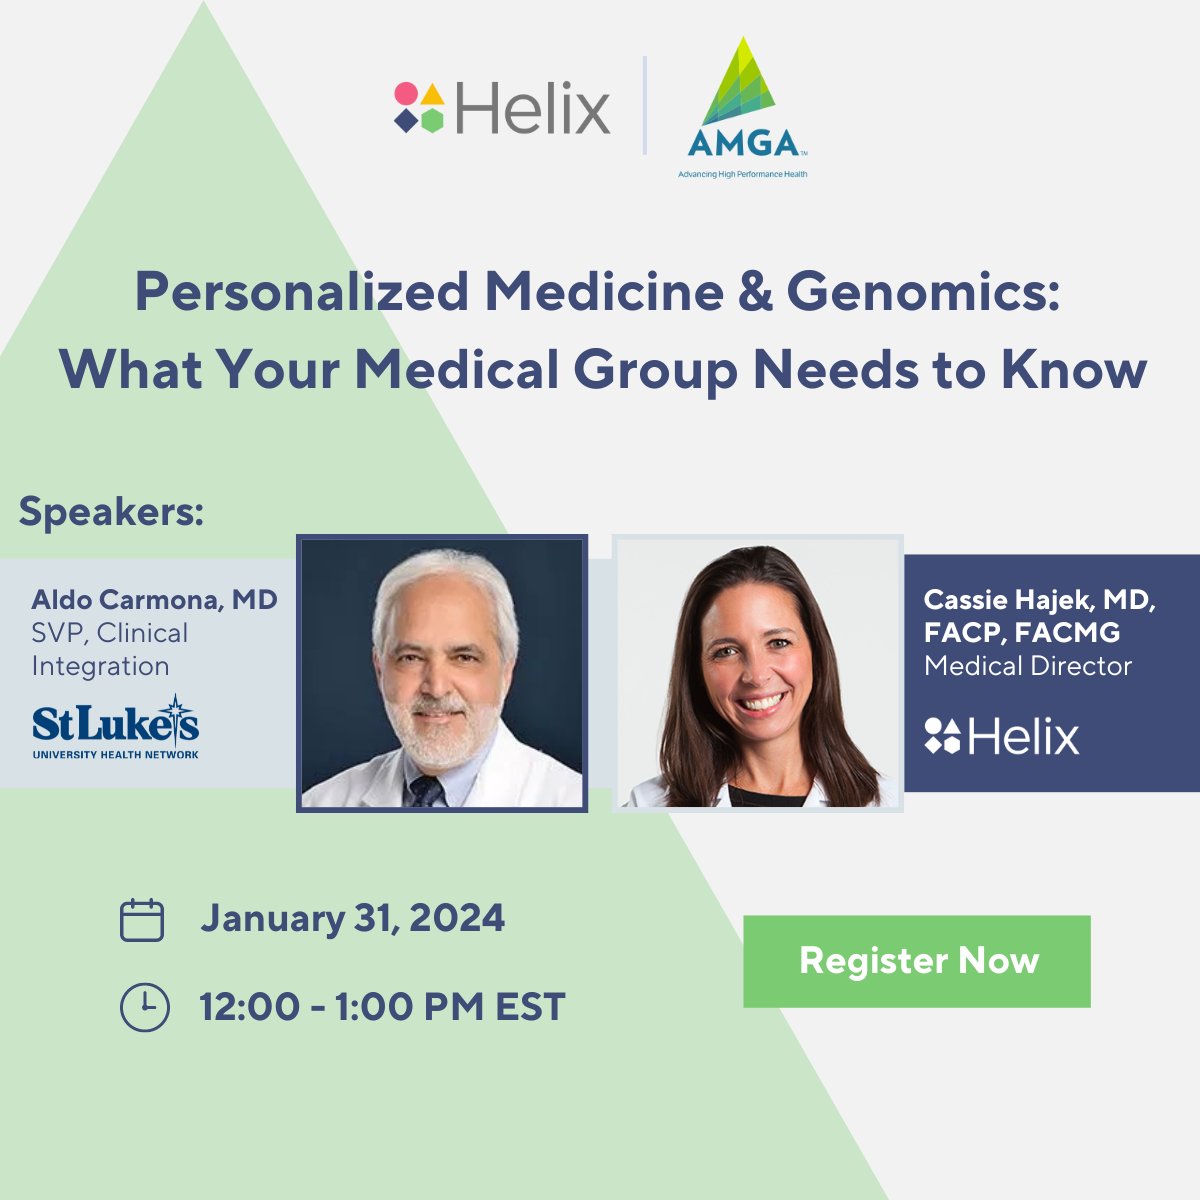 There is still time to register for our upcoming webinar, Personalized Medicine & Genomics: What Your Medical Group Needs to Know. Learn from experts how genomics can enhance personalized medicine and boost provider-patient impact. Register Now bit.ly/497CKa7